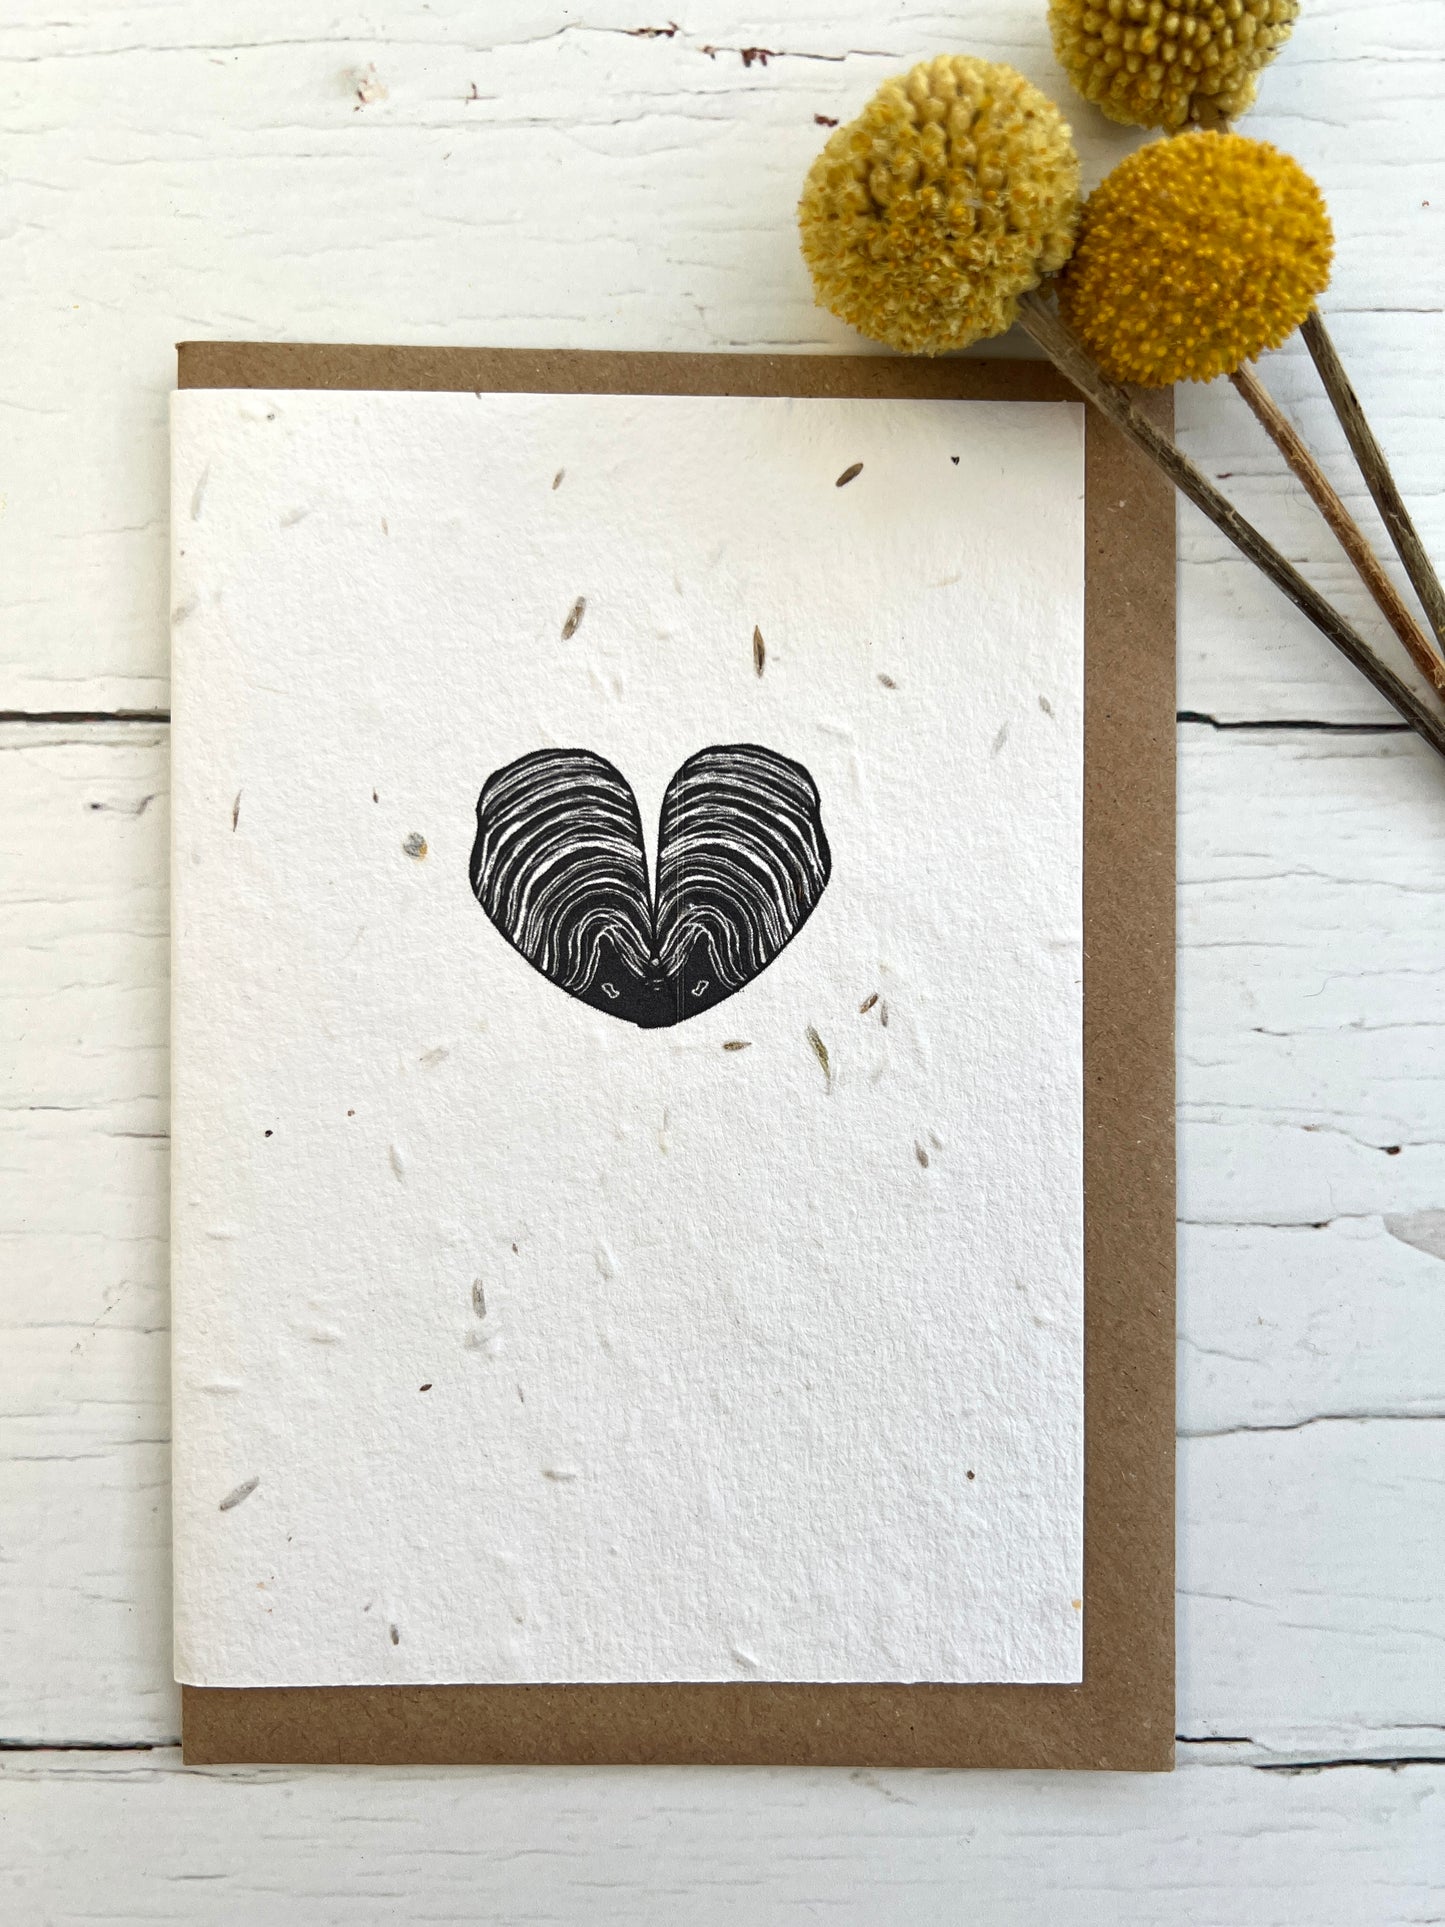 Mussel Heart Eco Greetings Card Embedded with Meadow Seeds